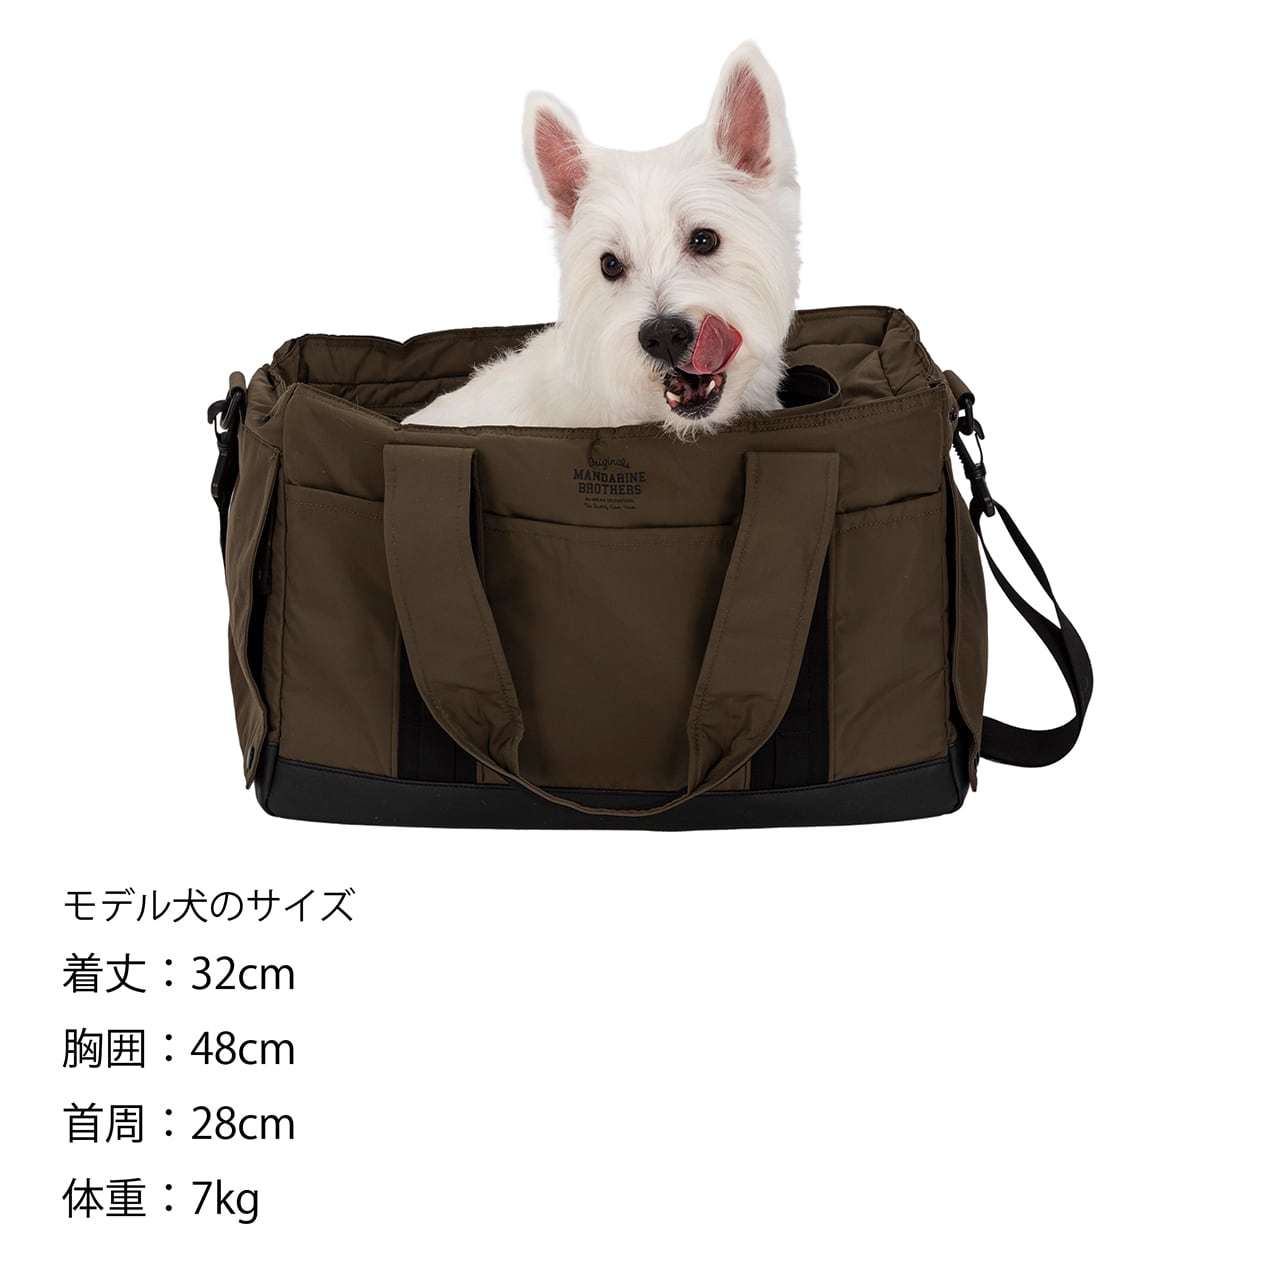 GLASGOW CARRY TOTE BAG グラスゴーキャリートートバッグ | MANDARINE BROTHERS公式BASEショップ  powered by BASE